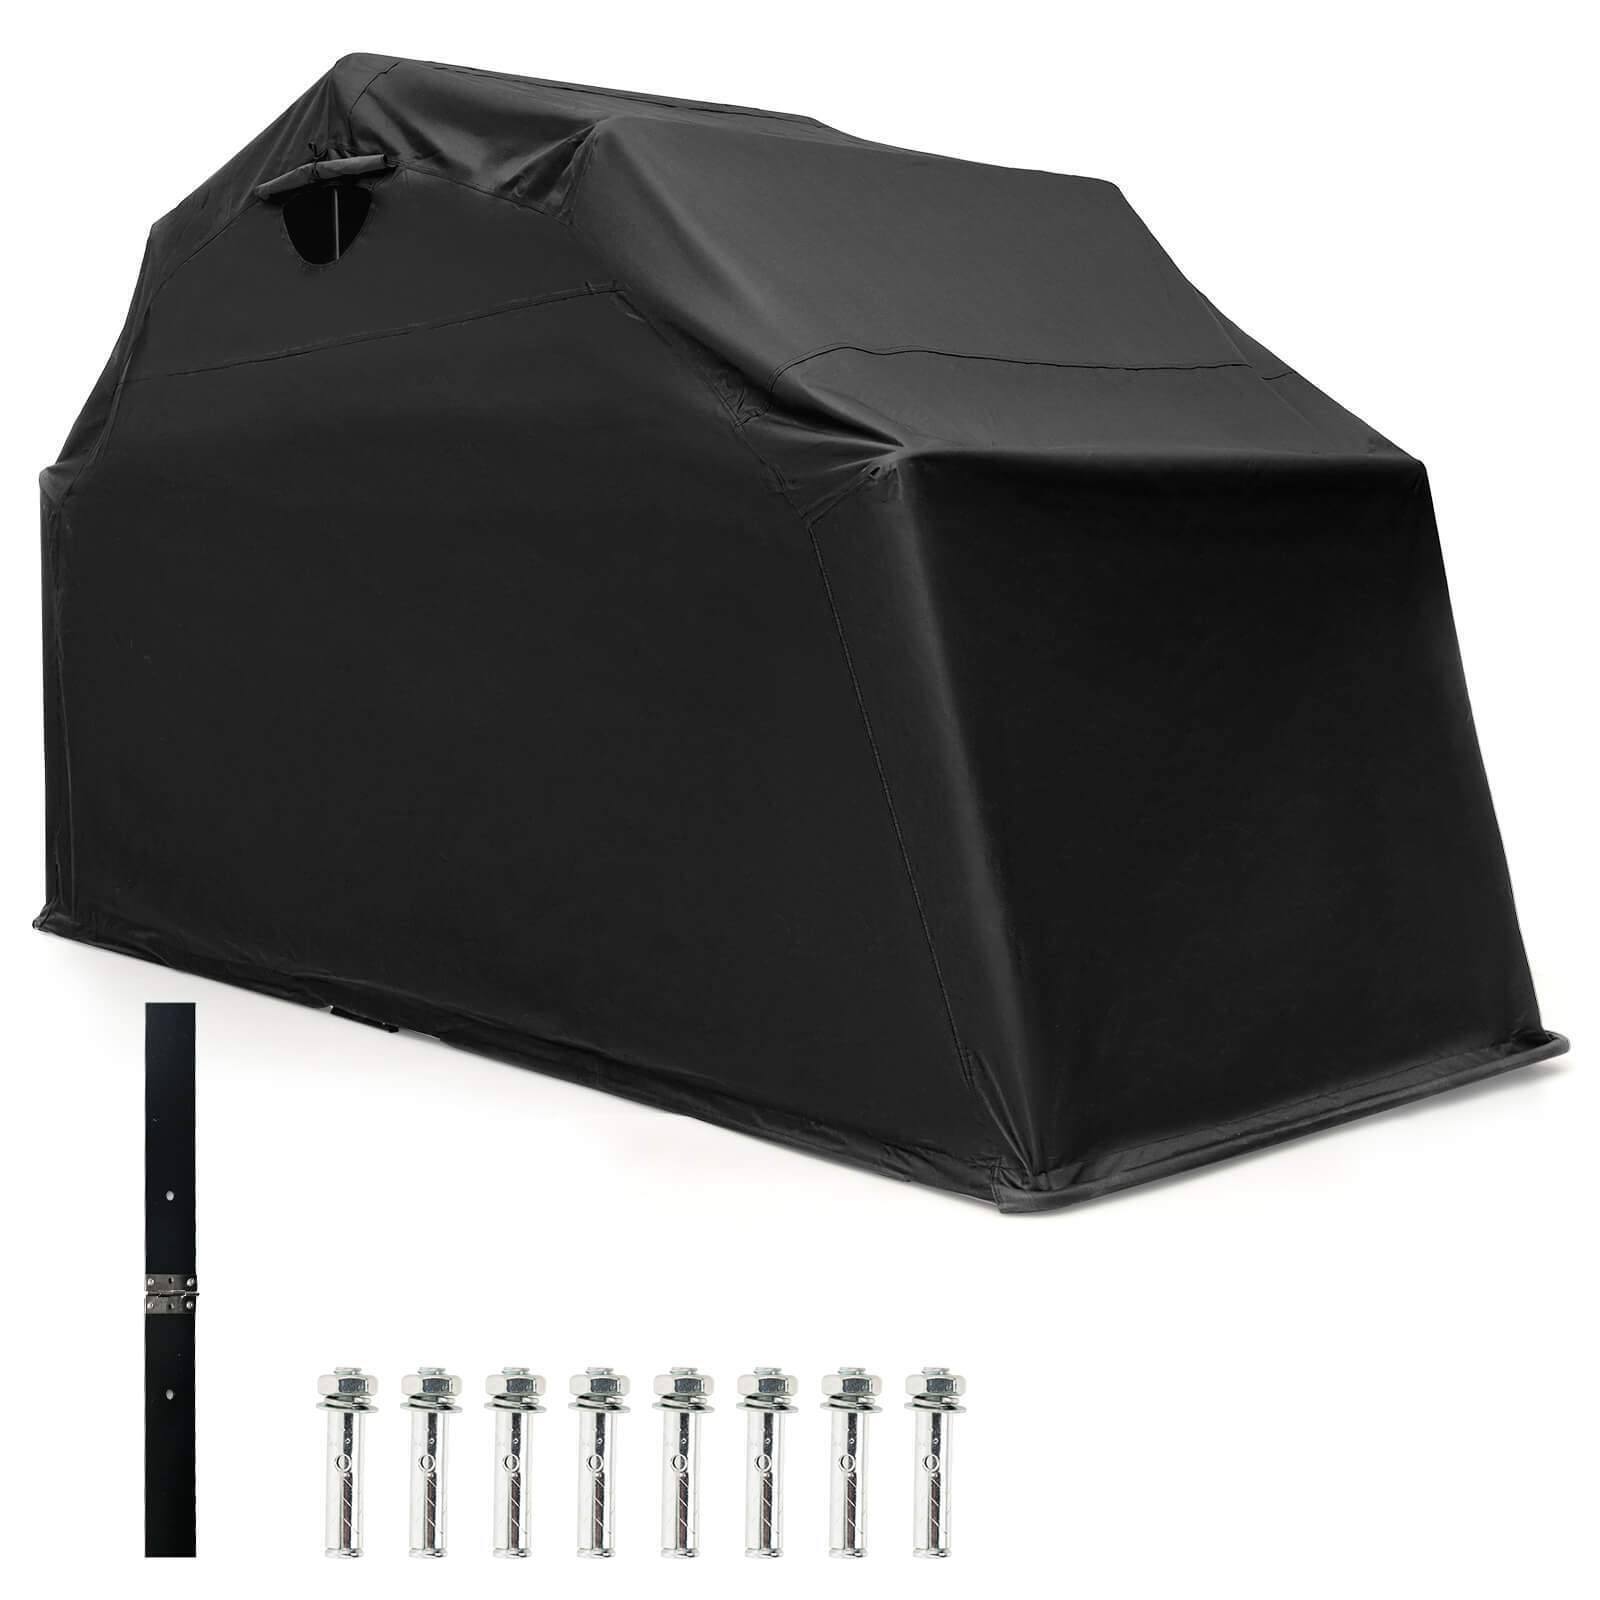 SUPERBUY Heavy-Duty Outdoor Motorcycle Shelter w/ 600D Oxford Fabric Cover